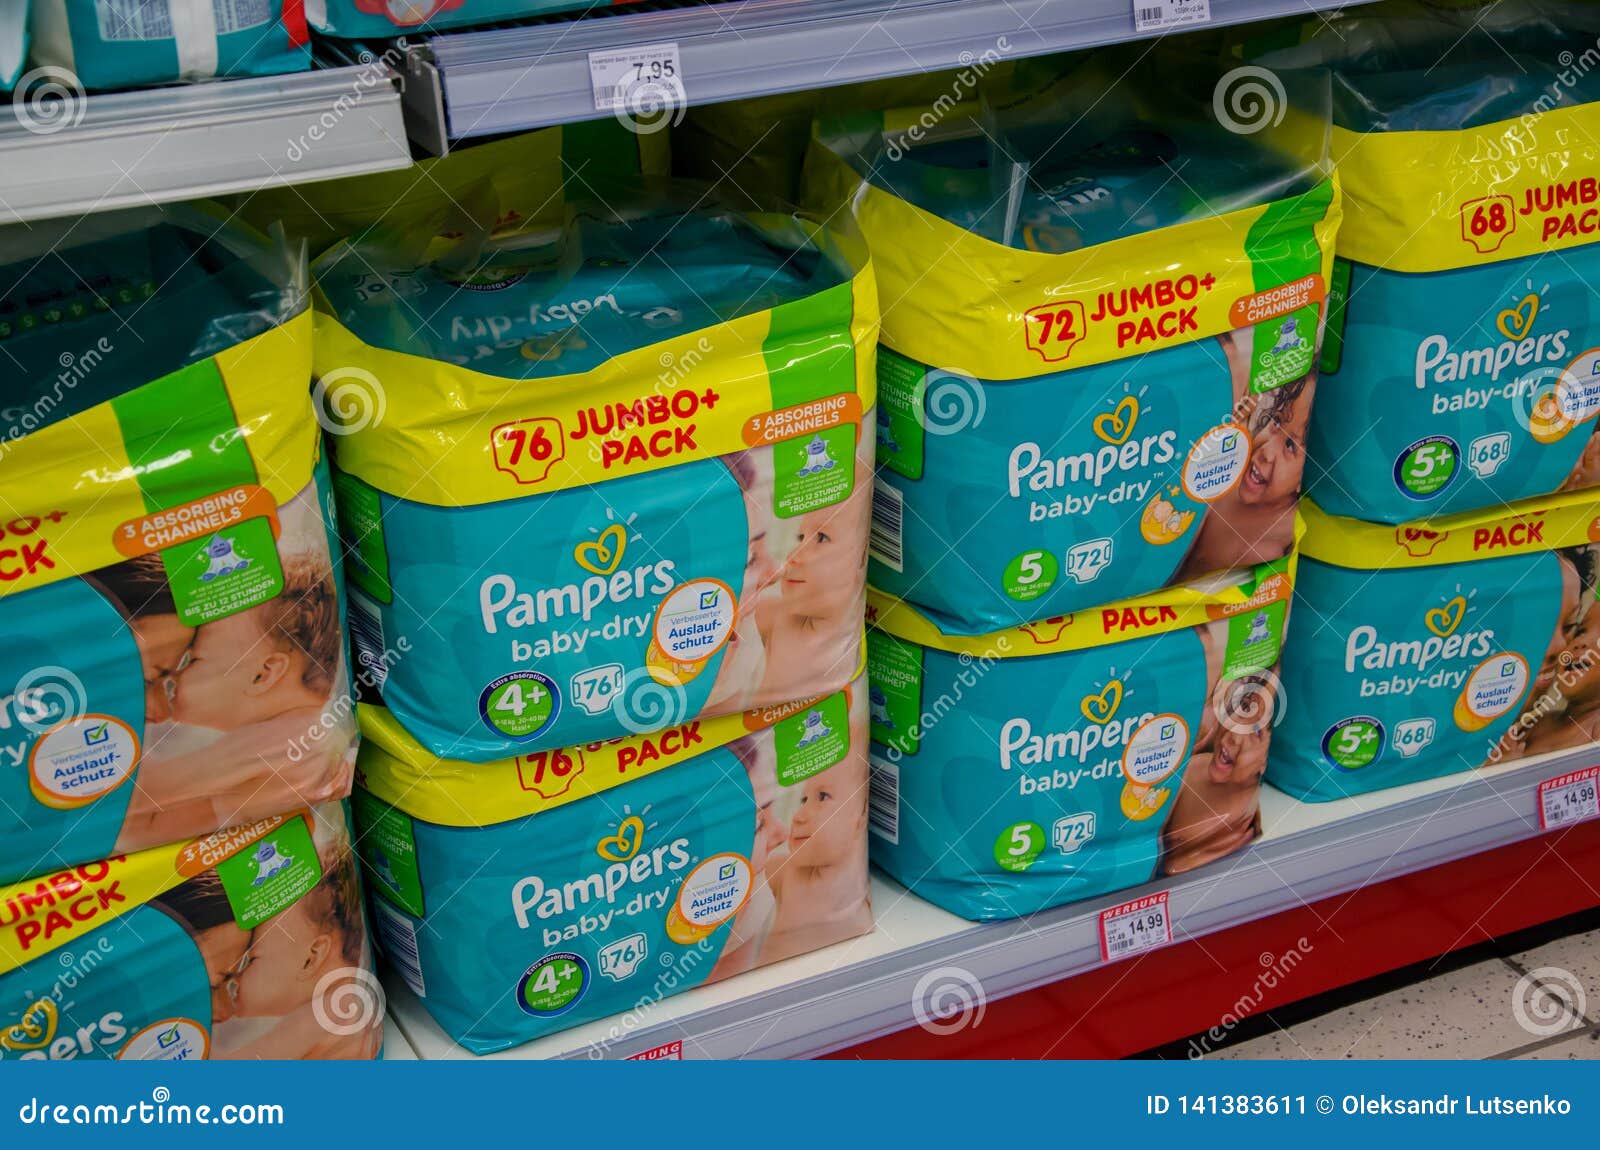 pampers pants 3 carrefour